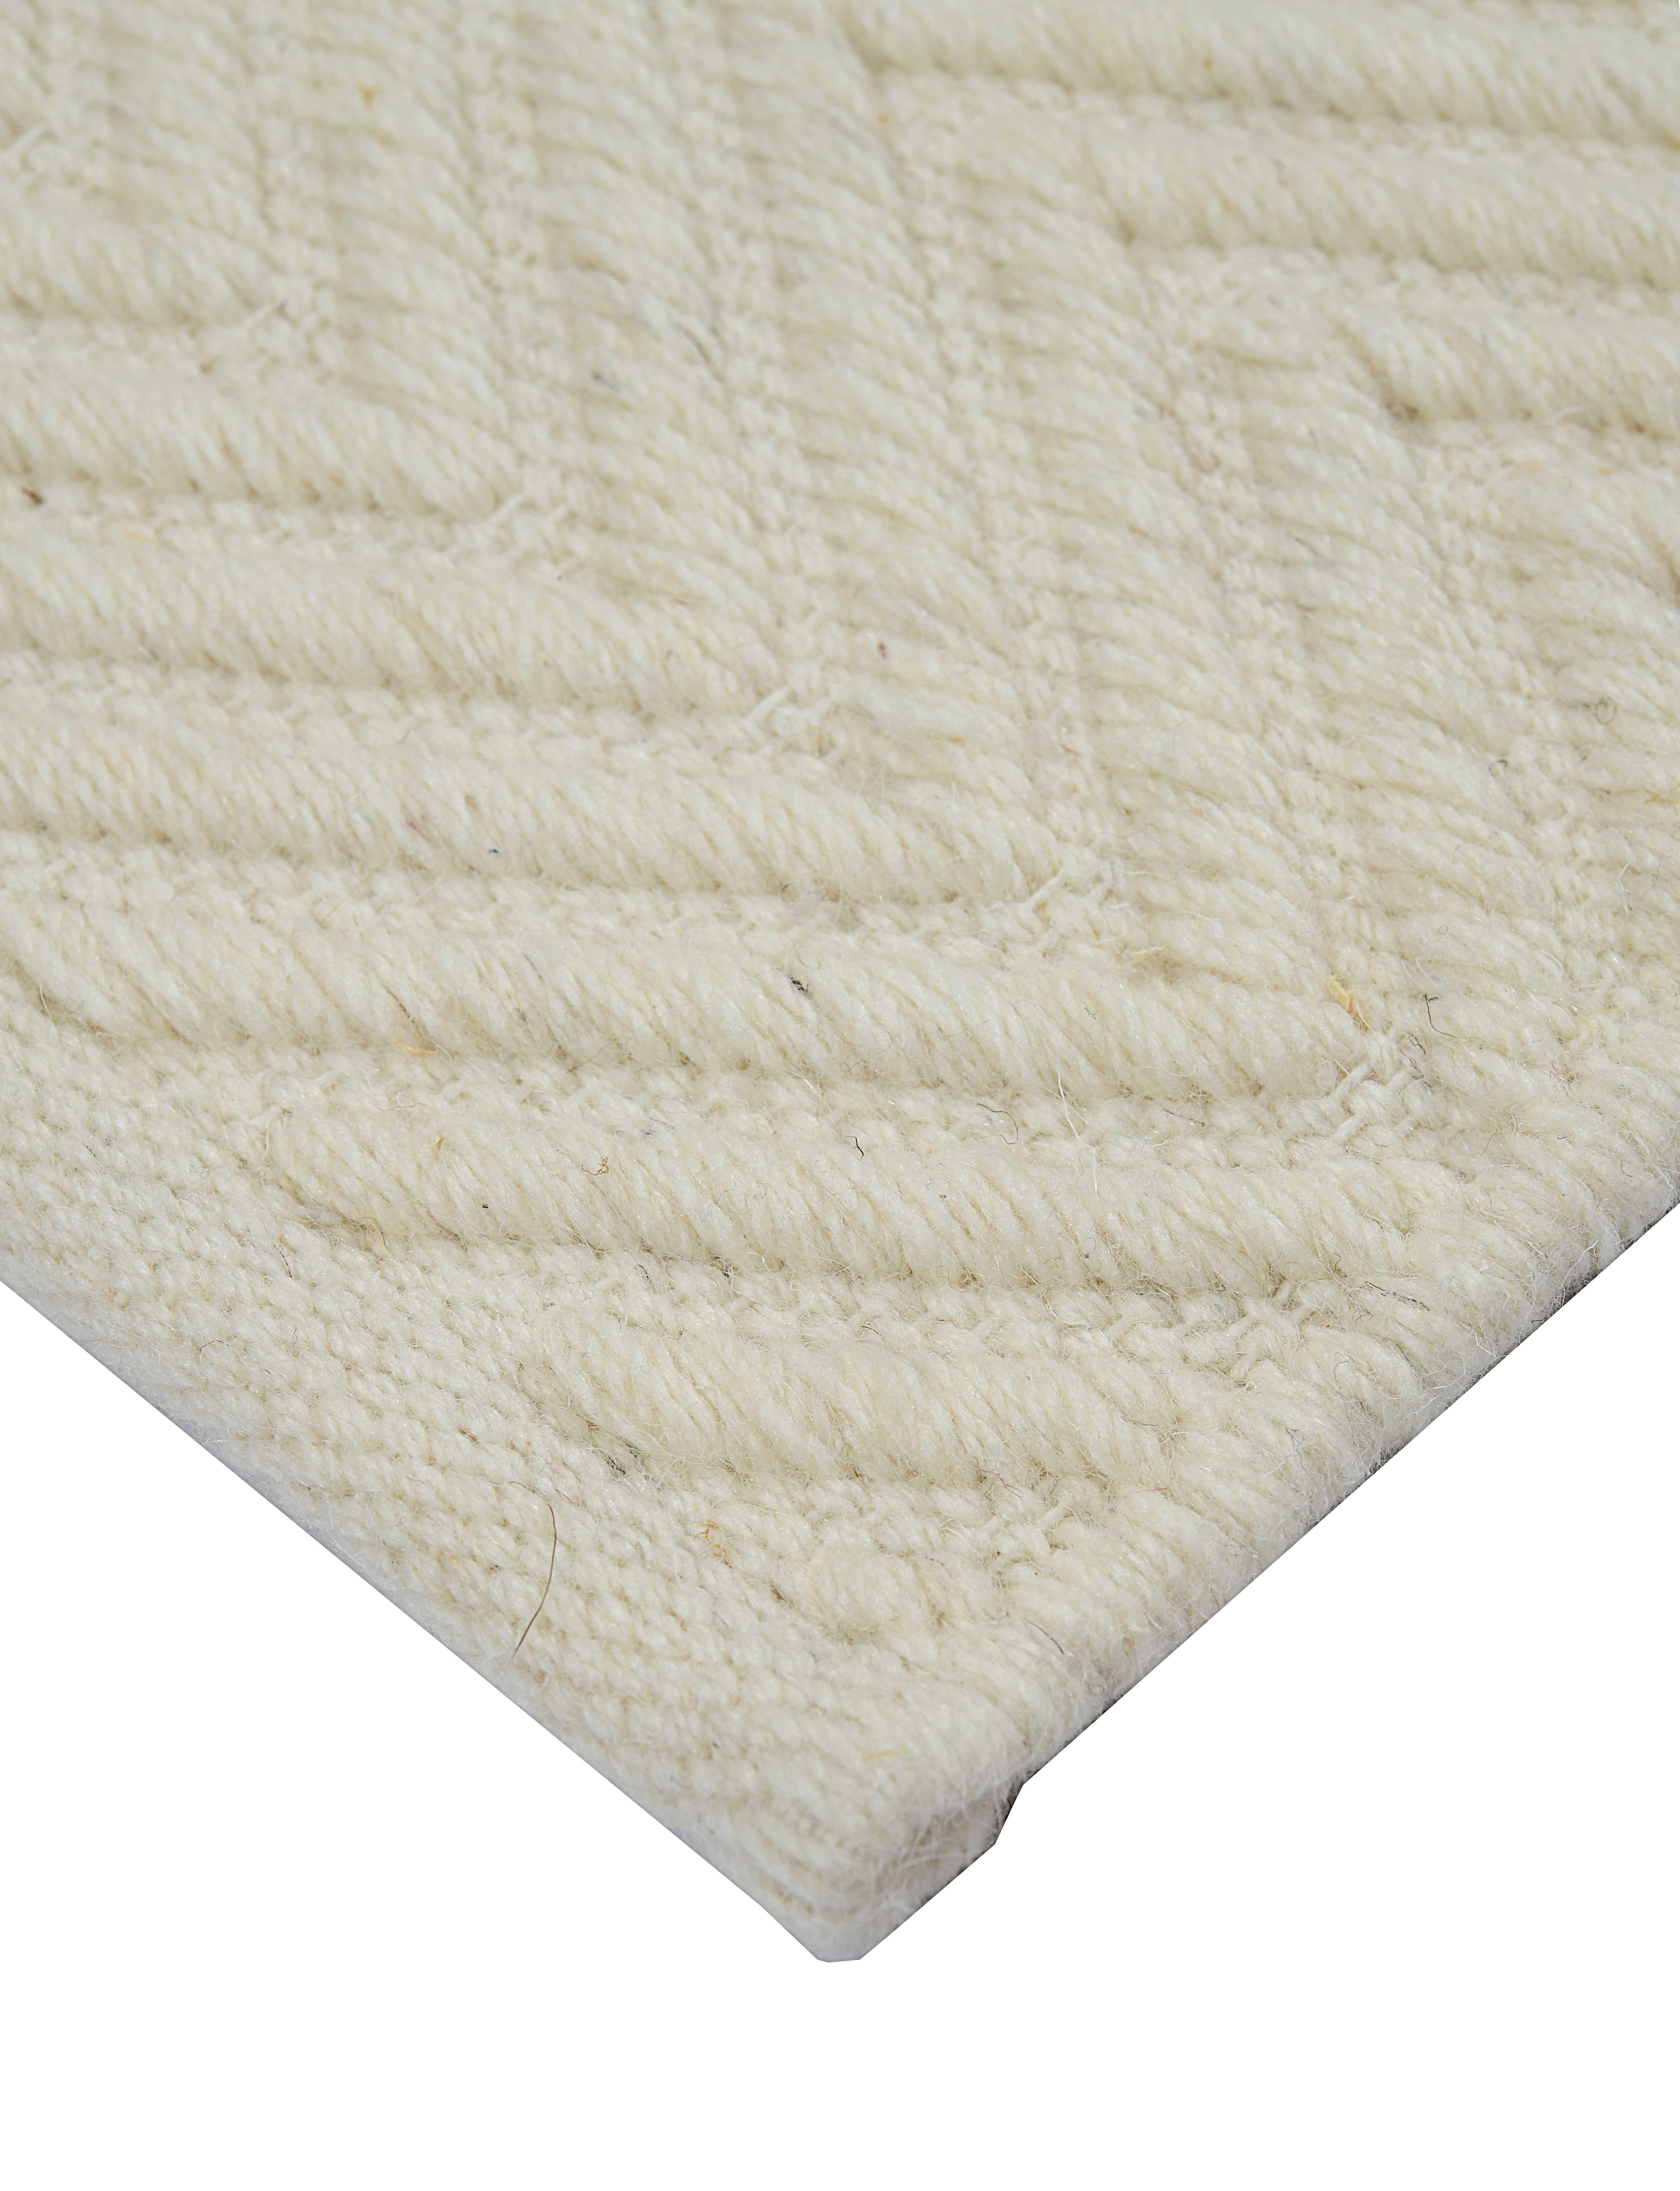 Lanx, Ivory, Handwoven Face 60% Undyed NZ Wool, 40% Undyed MED Wool, 8' x 10' In New Condition For Sale In New York, NY